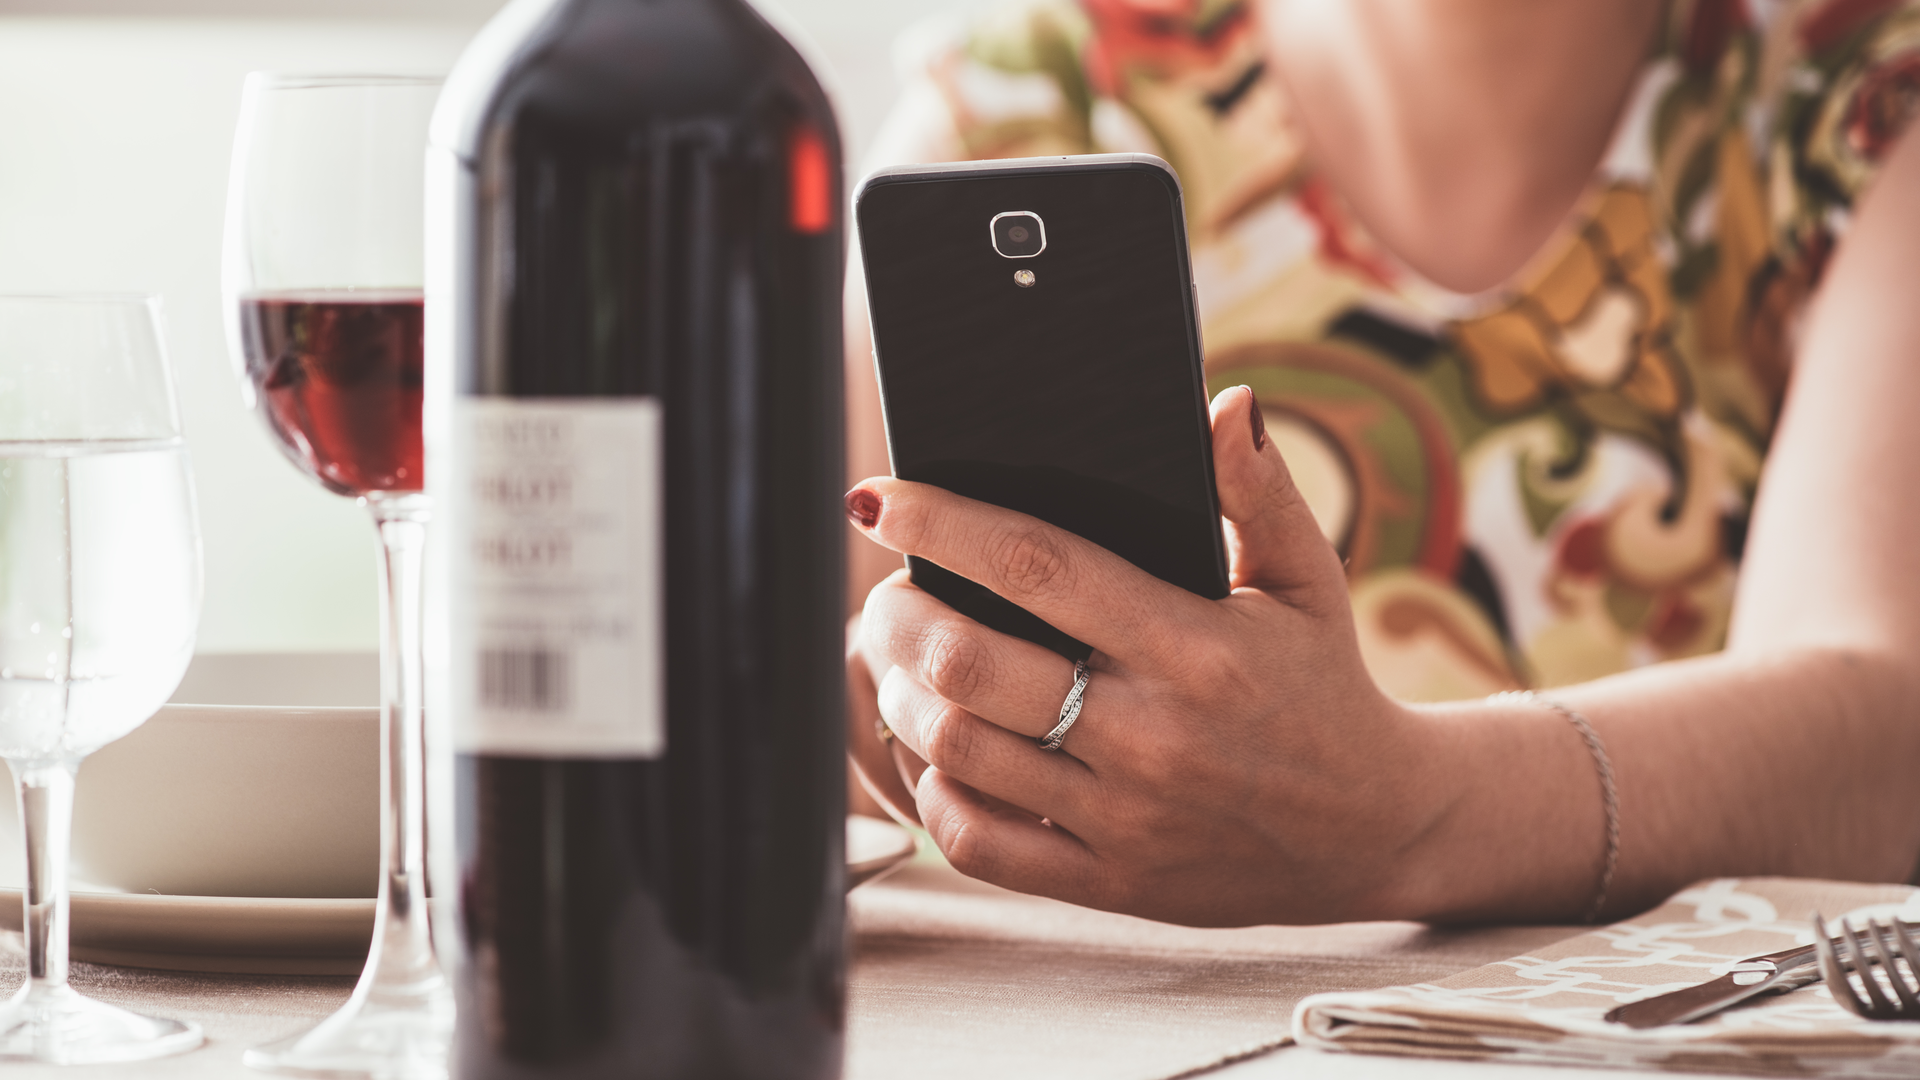 Woman having lunch at the restaurant and using a wine app with his smartphone, she is scanning the wine bottle label